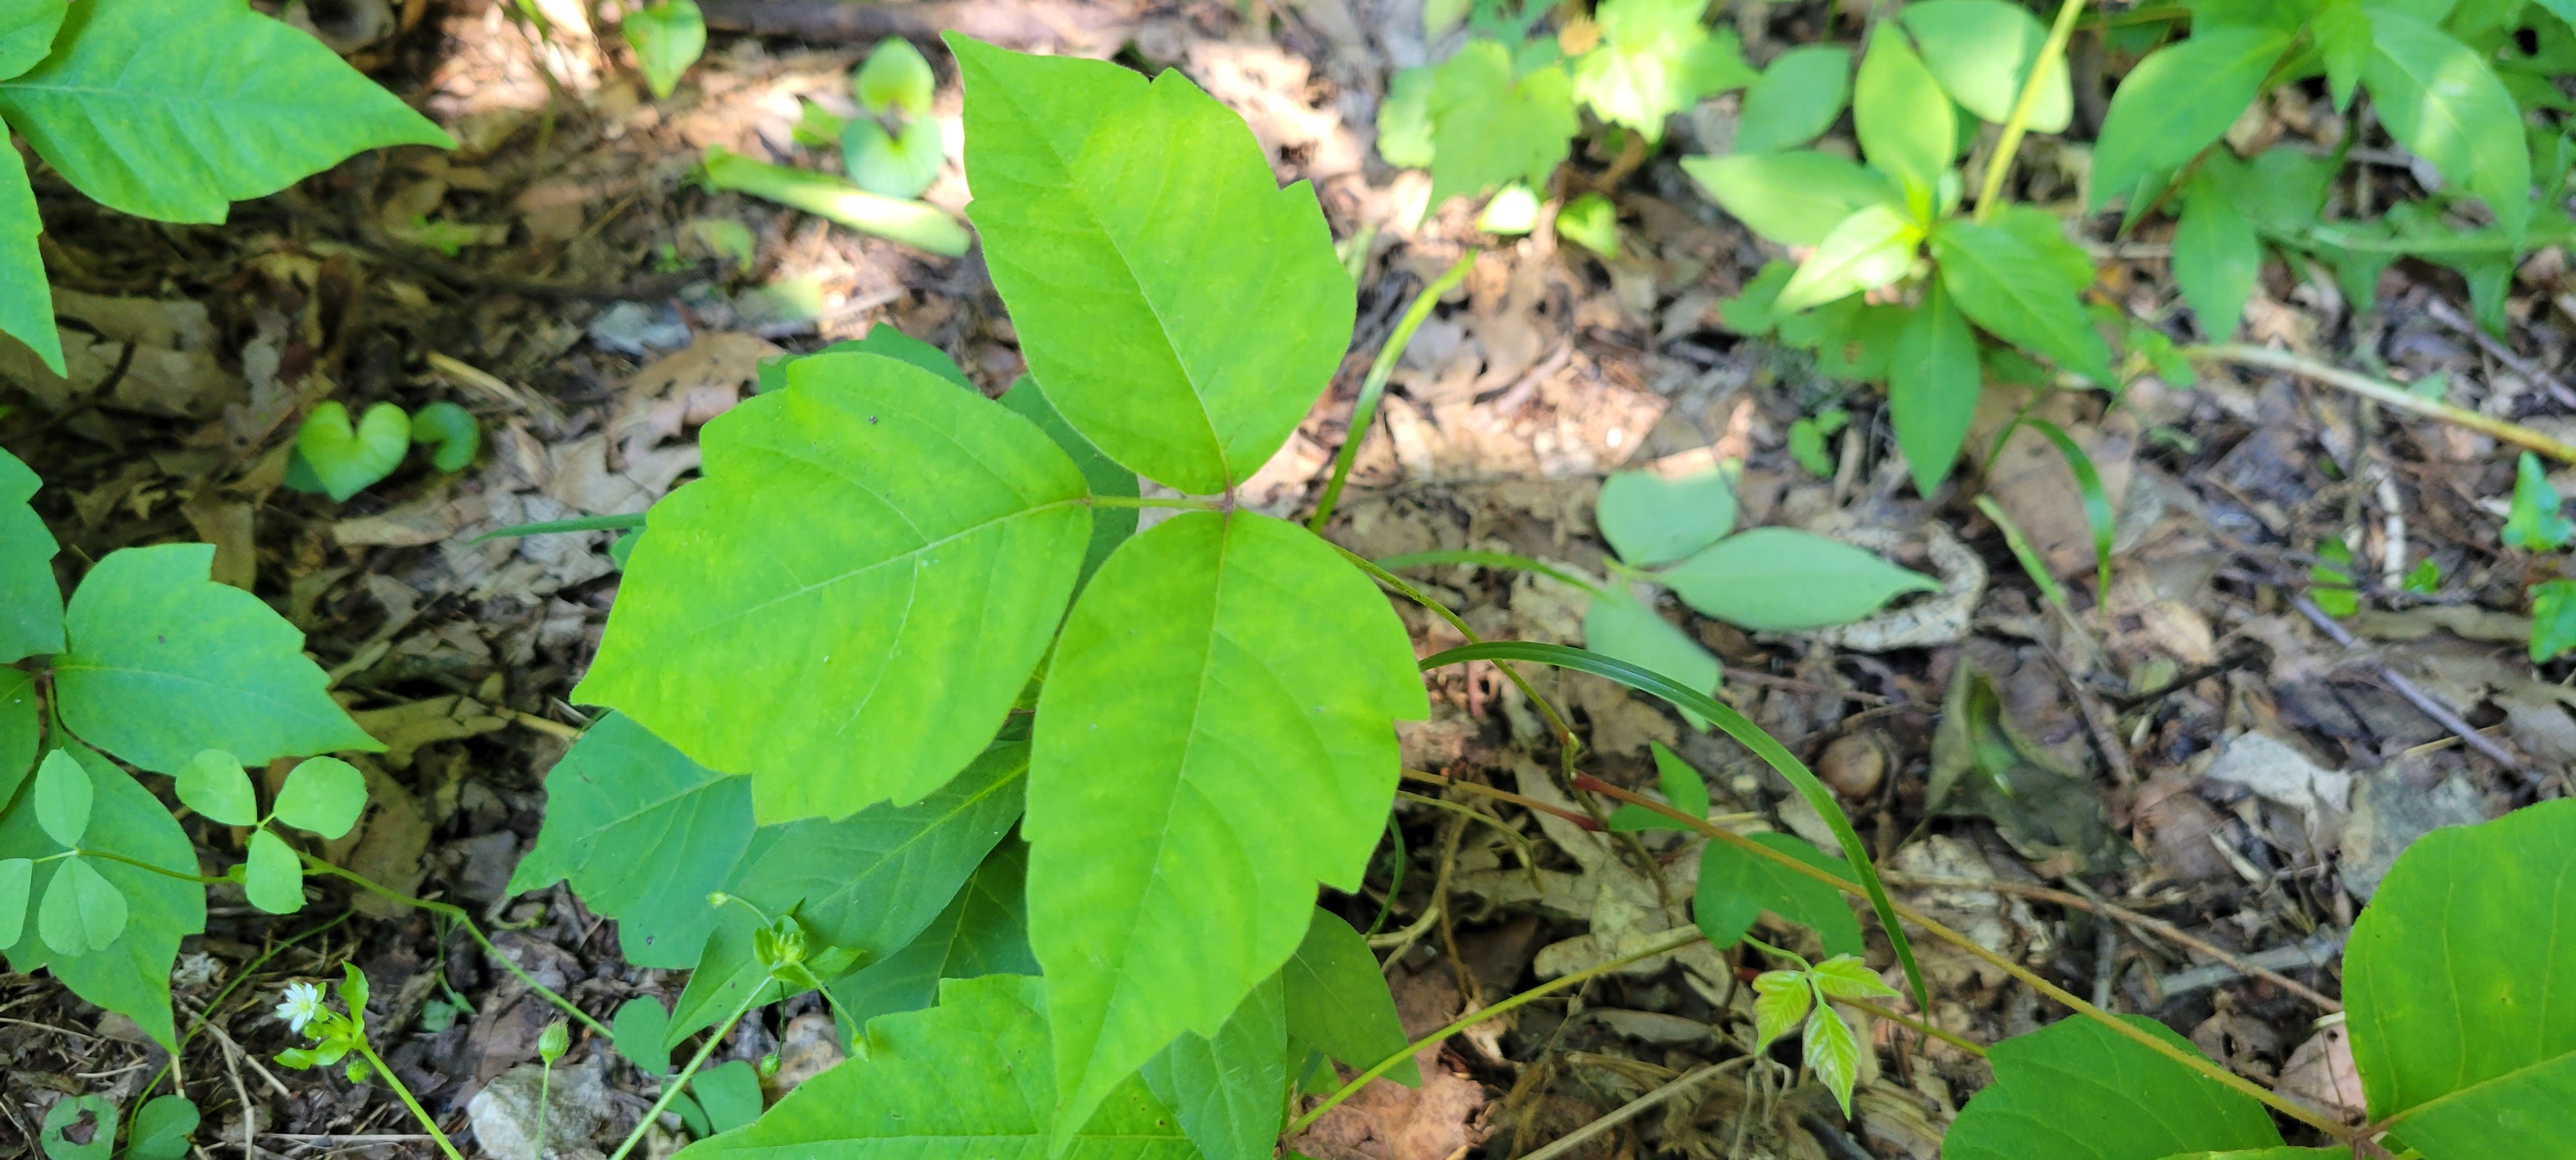 Poison ivy in any form can ruin your day. Here's how to get rid of it